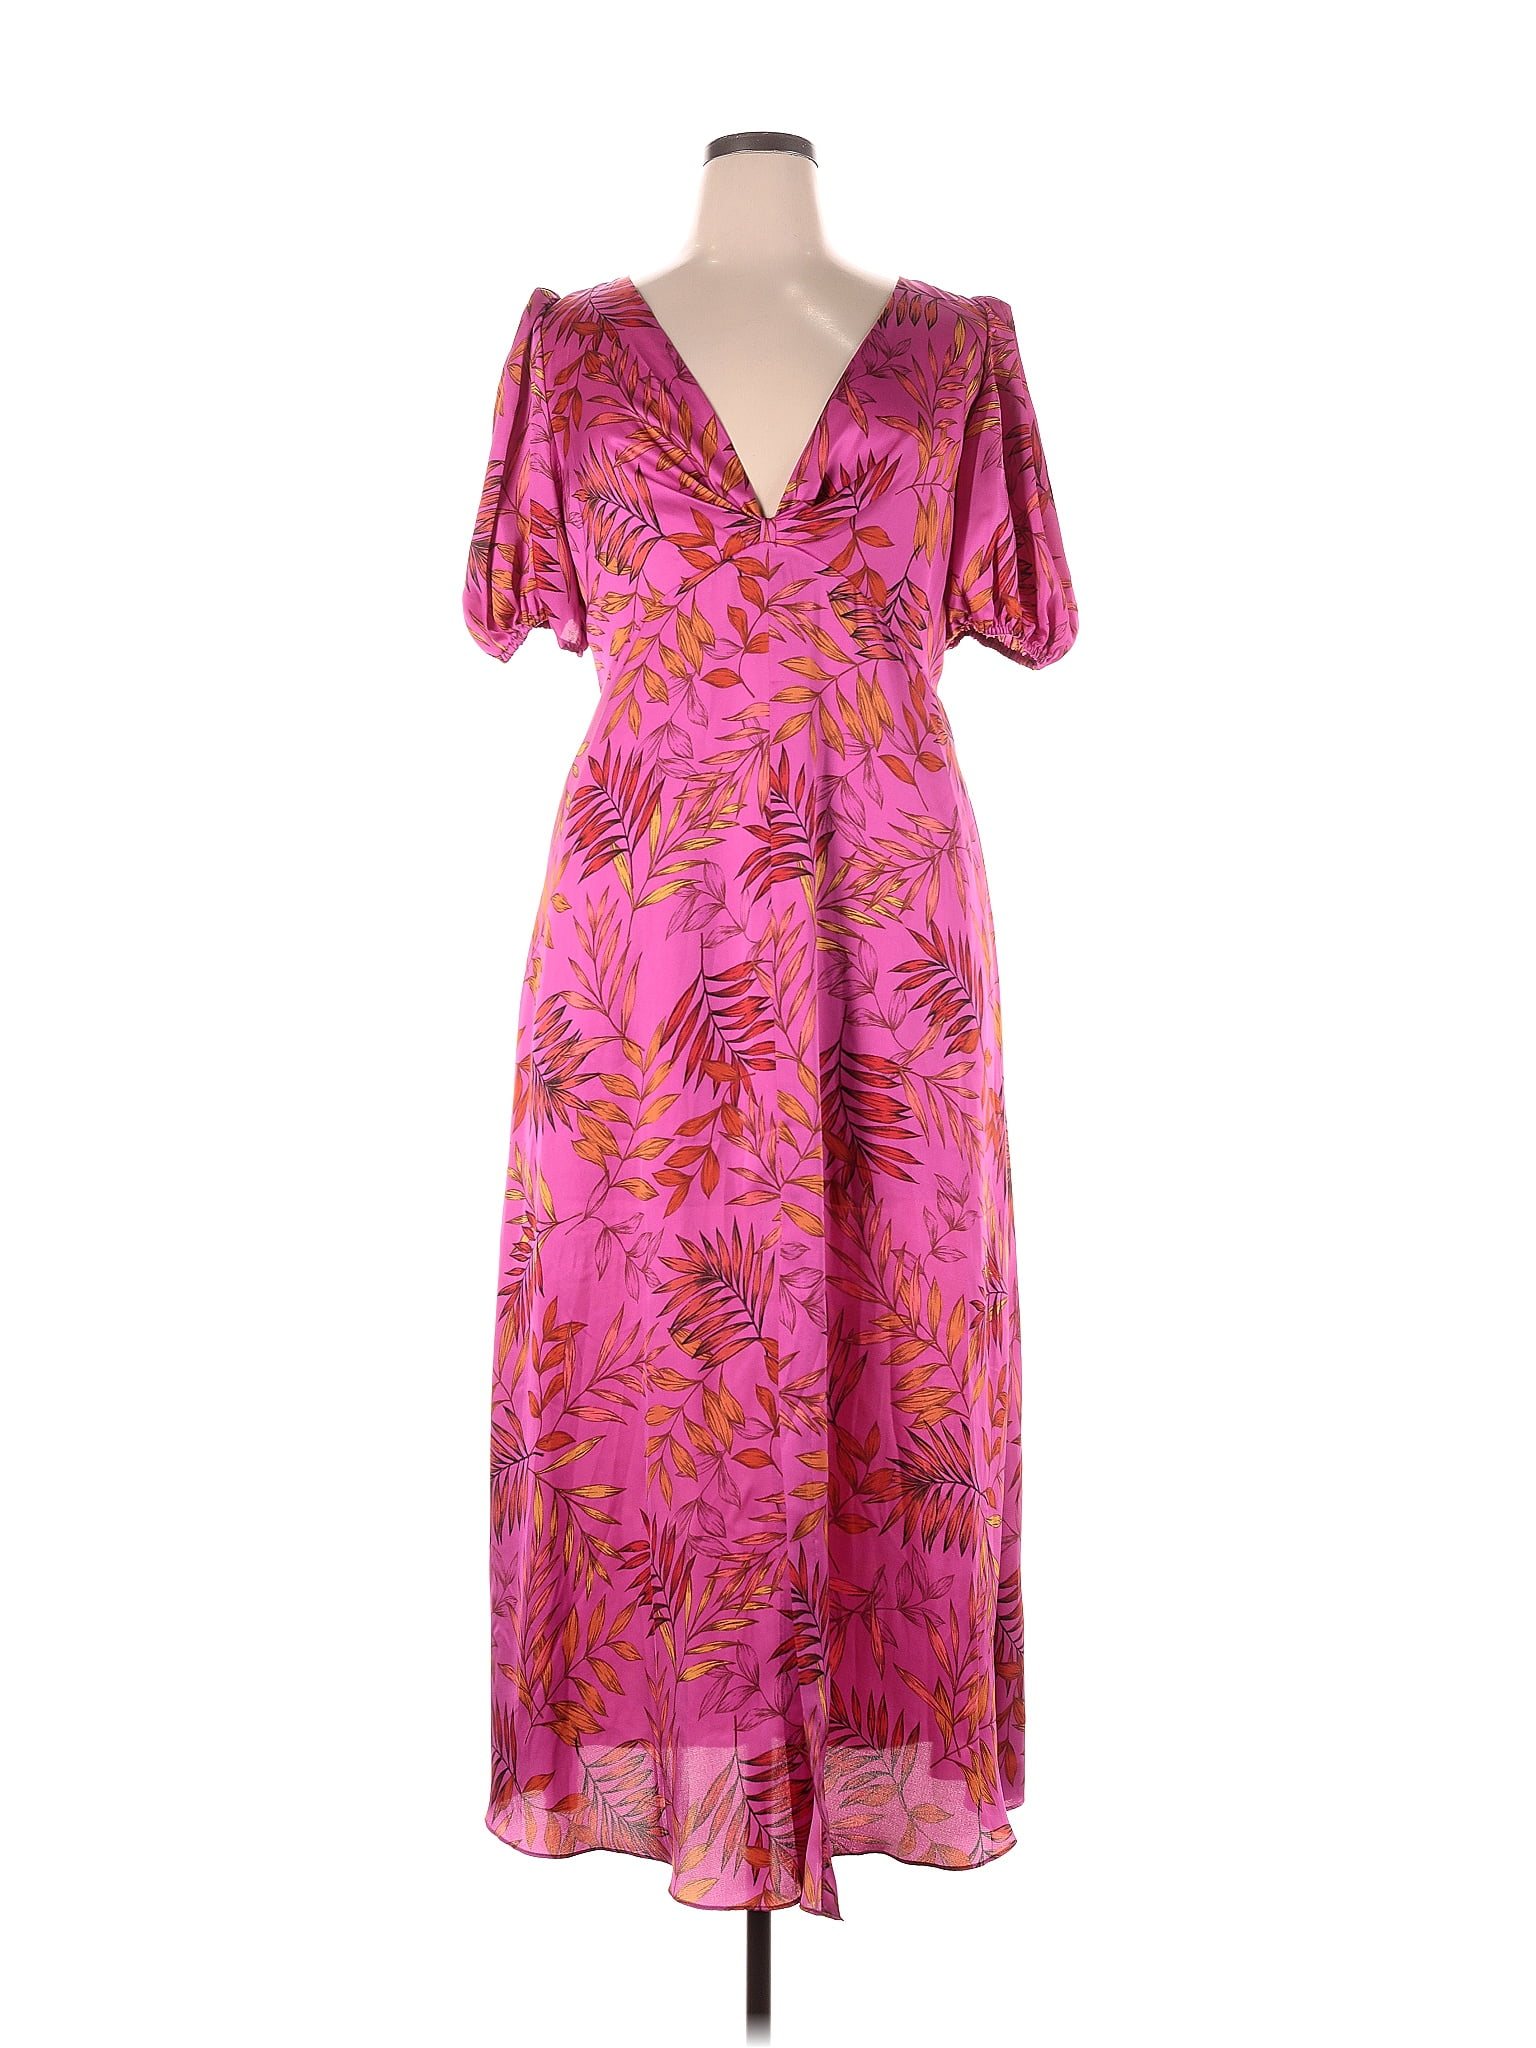 Sachin + Babi 100% Polyester Floral Pink Casual Dress Size 14 - 75% off ...